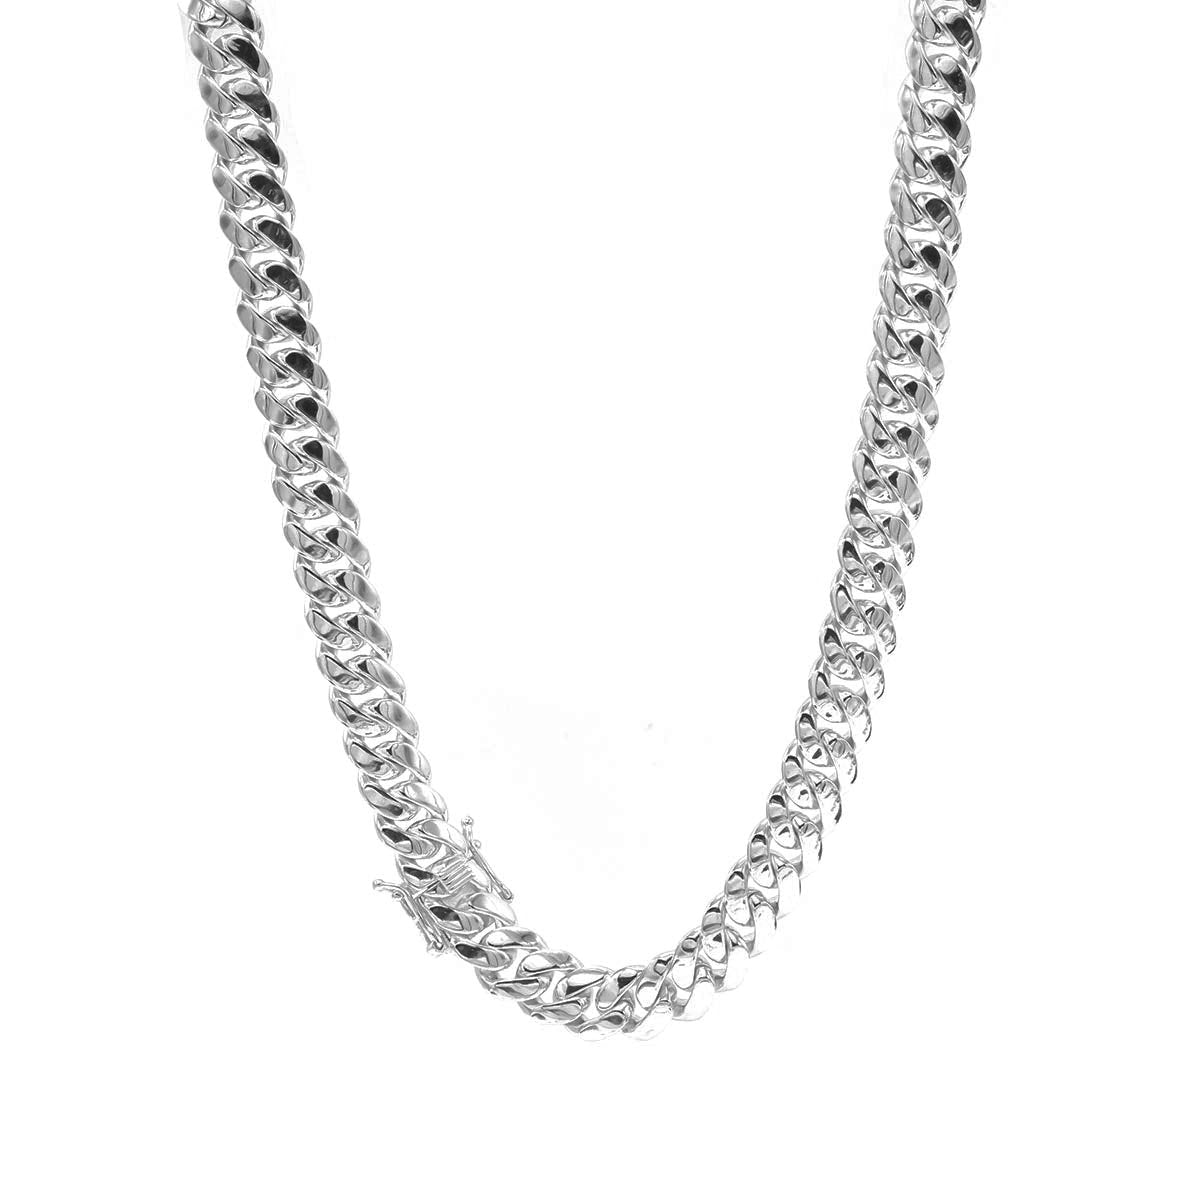 STNB-09 925 Silver Plain Cuban Chain 8mm 18" 20" 22" 24" 7" 7.5" 8" Price by Weight